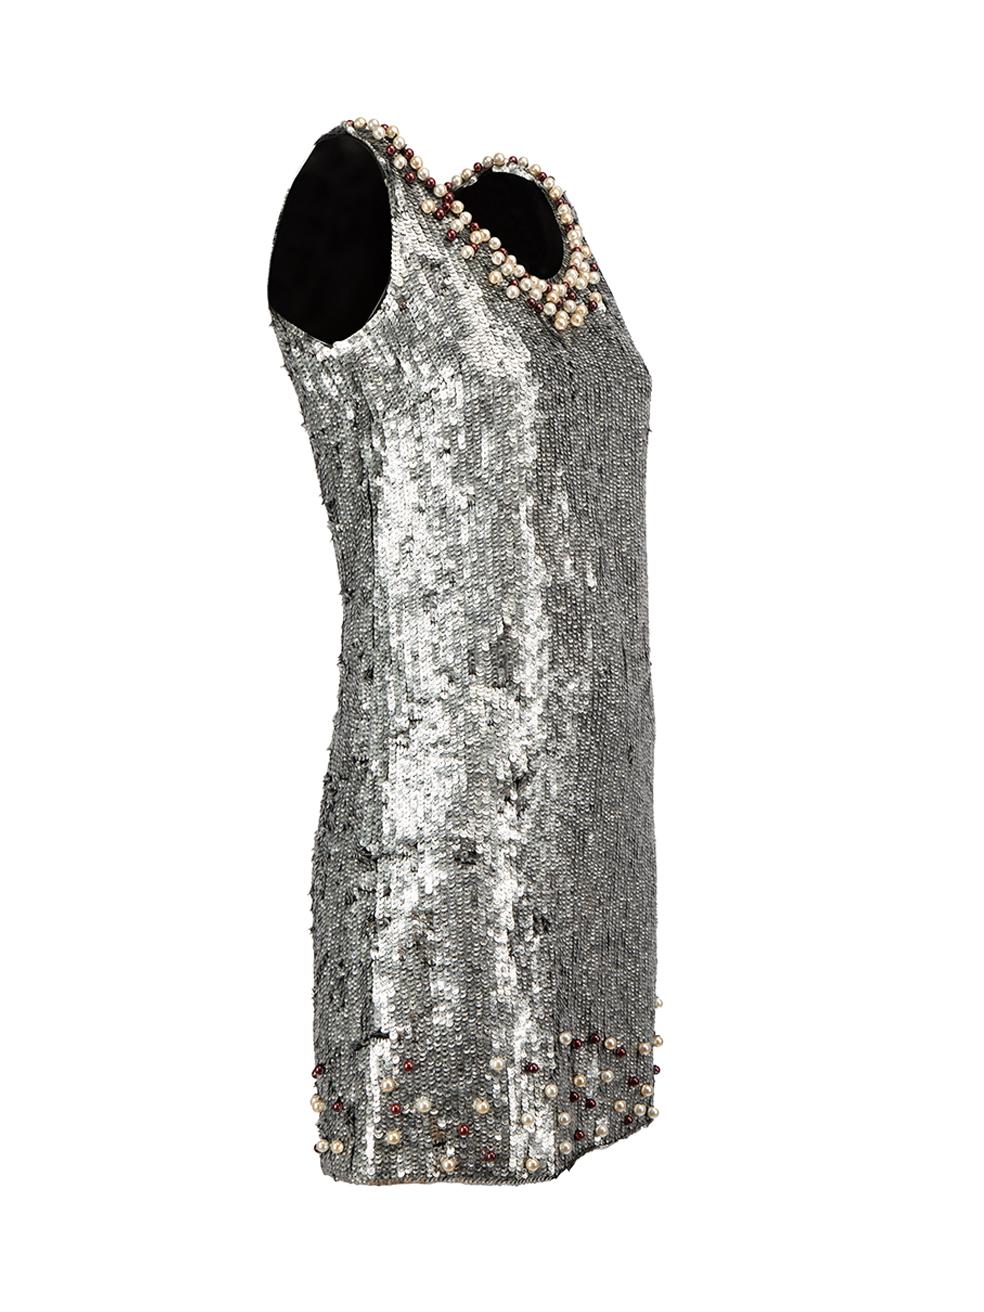 CONDITION is Good. Minor wear to dress is evident. Light wear to beading with minor discolouration and some sequins missing on this used Red Valentino designer resale item.
 
 Details
 Silver
 Sequin
 Mini dress
 Sleeveless
 Round neckline
 White